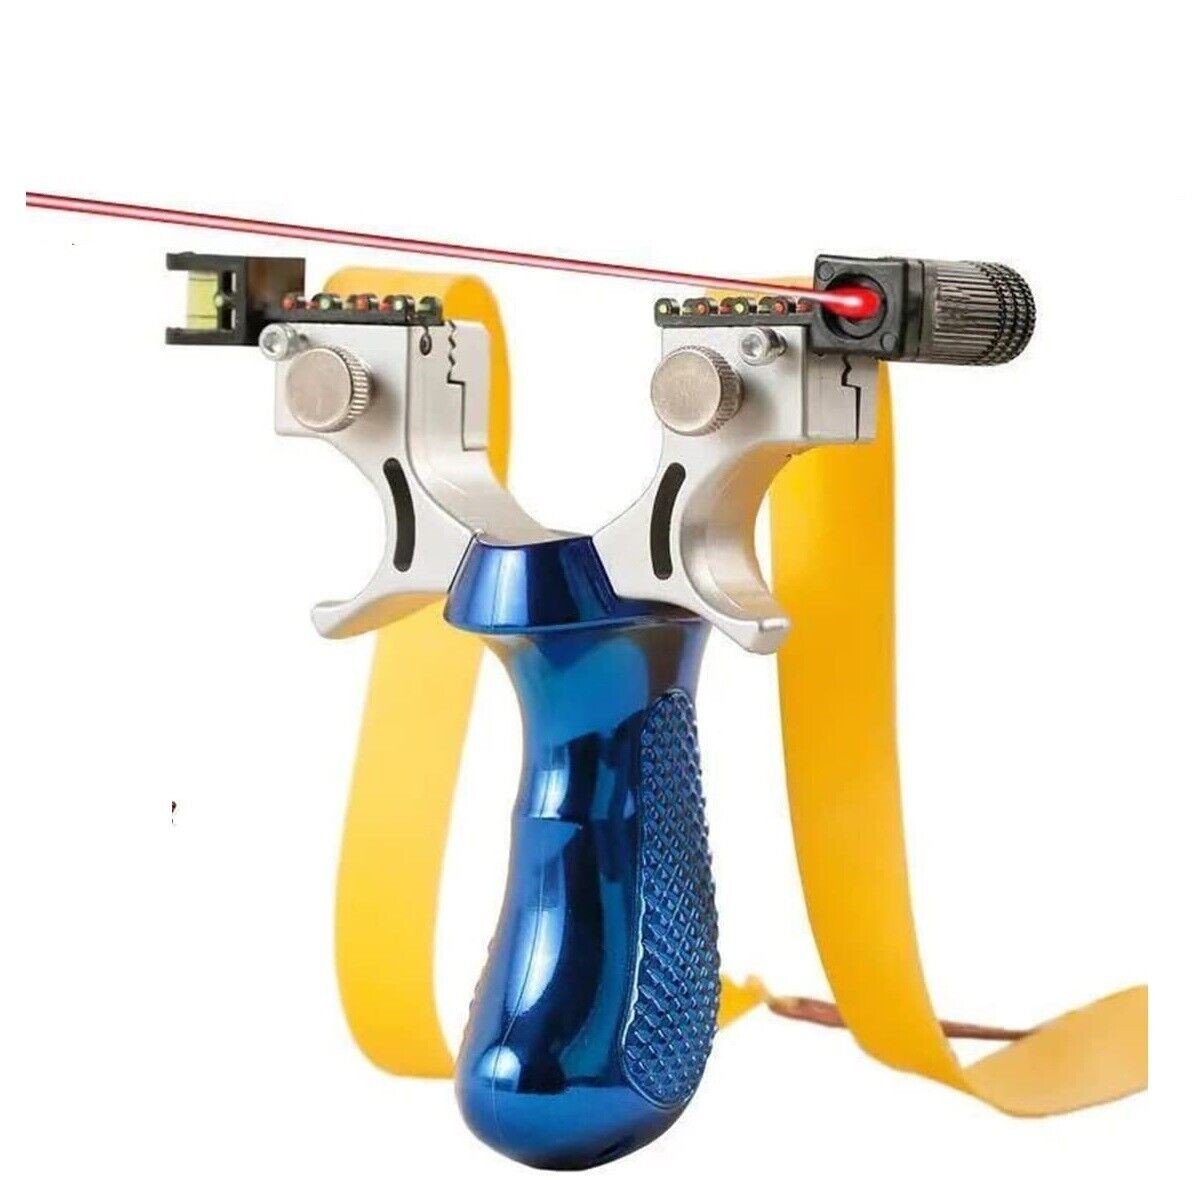 Hunting Professional Catapult Laser Slingshot With Rubber Aim Point Target HOT